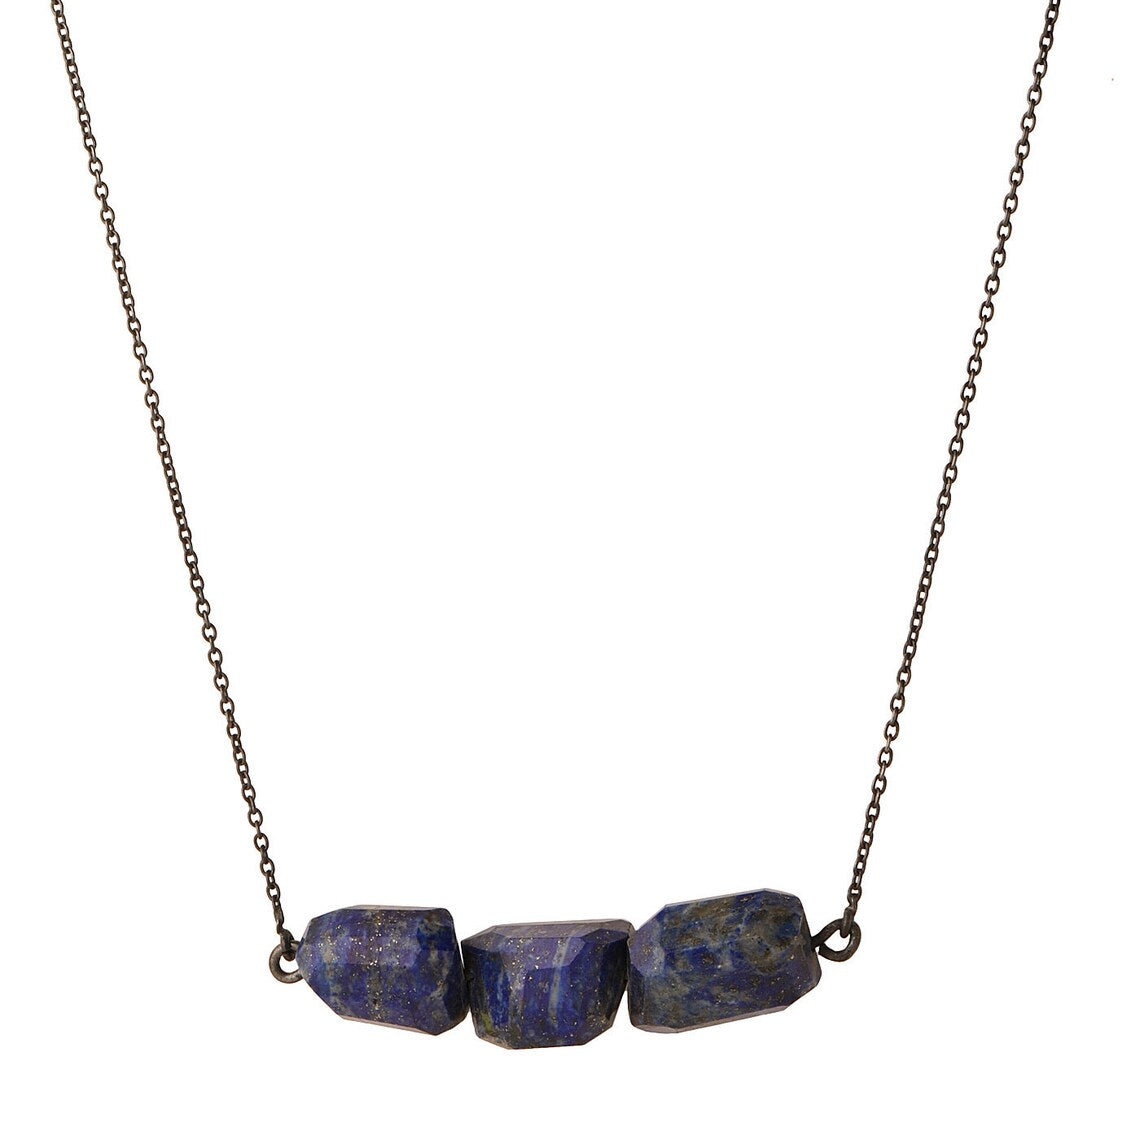 Lapis Necklace Lapis Lazuli Necklace Naturel Jewelry Stone Jewelry Mineral Necklace gift for mom gift for her